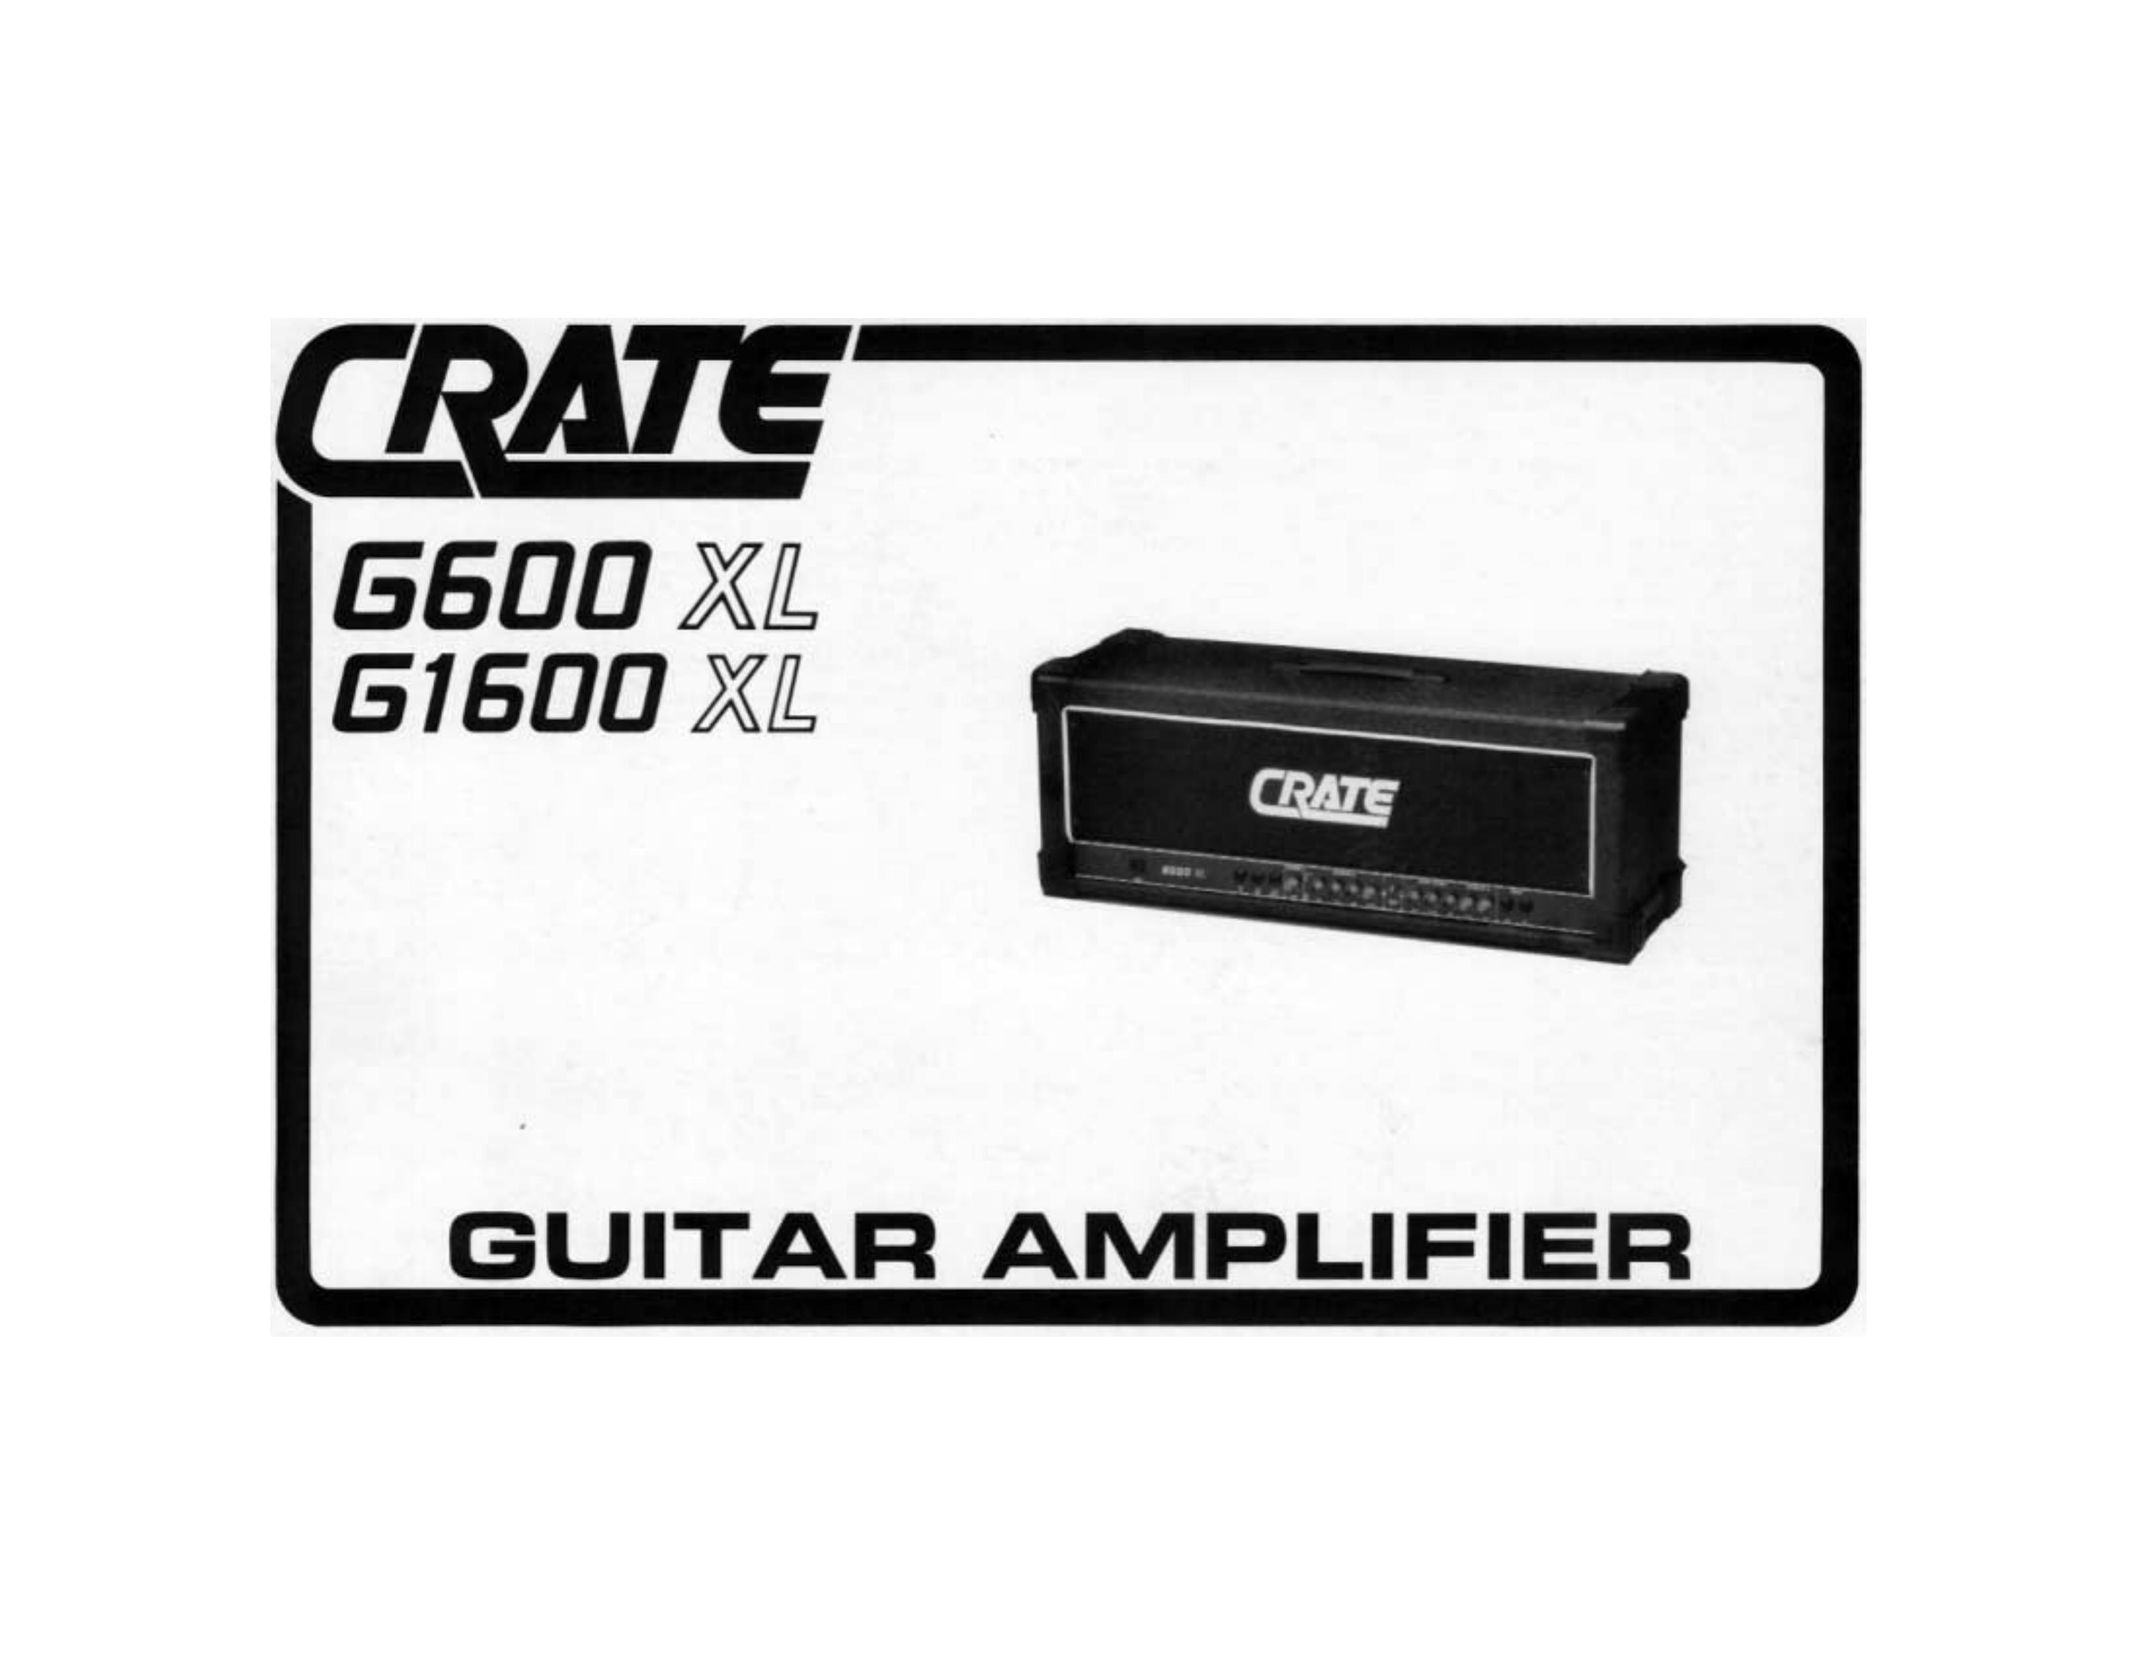 Crate Amplifiers G1600XL Speaker System User Manual